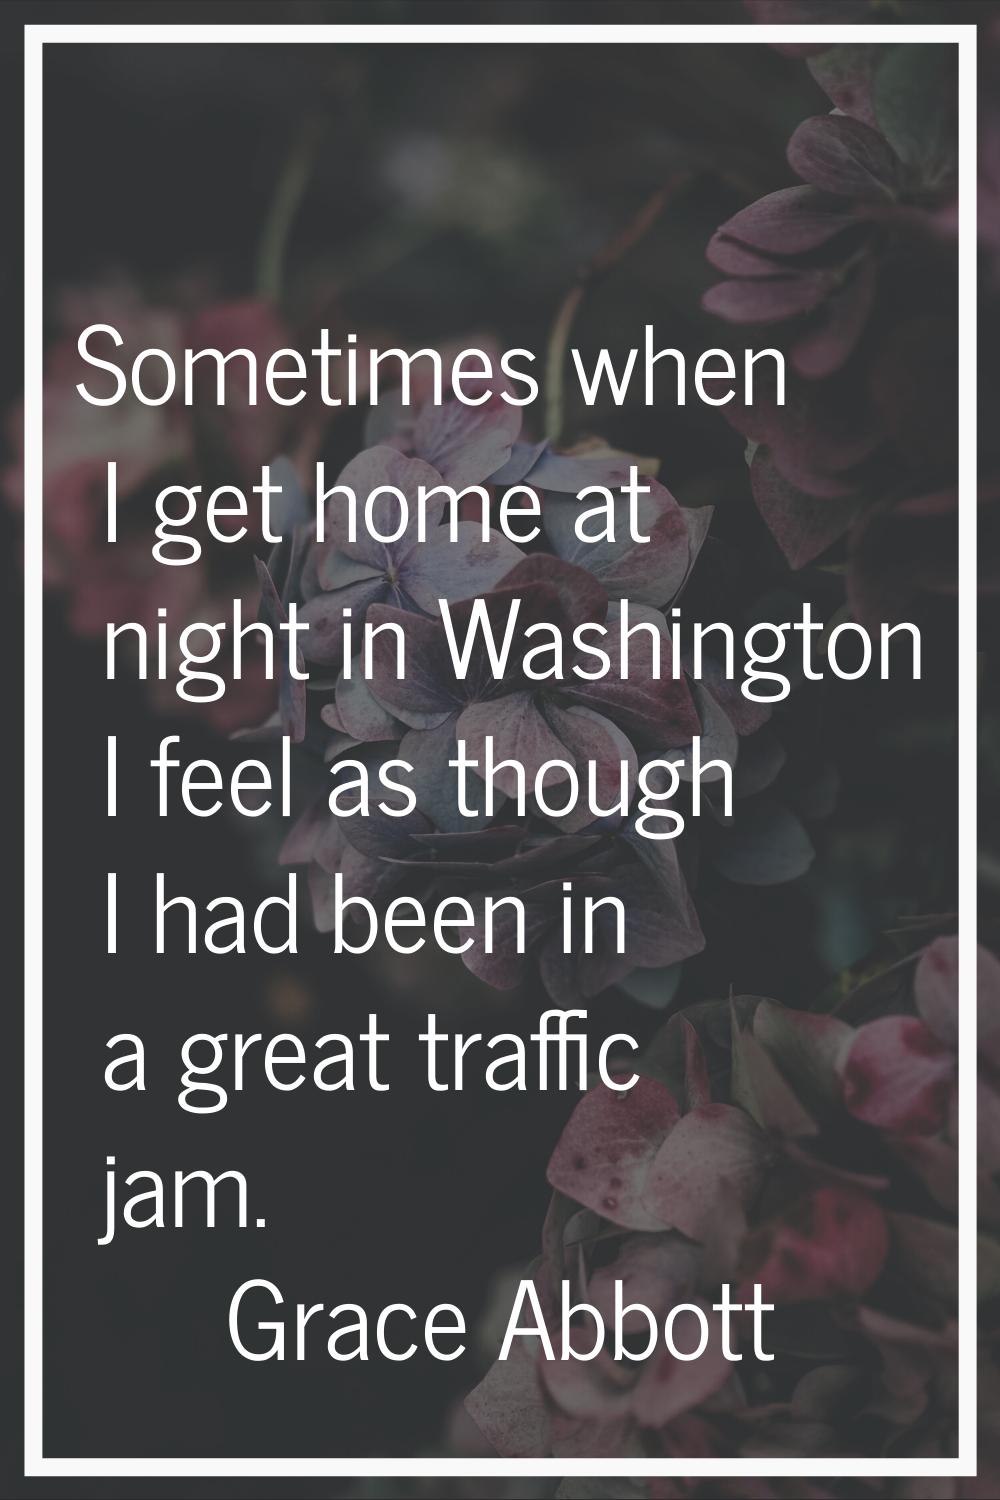 Sometimes when I get home at night in Washington I feel as though I had been in a great traffic jam